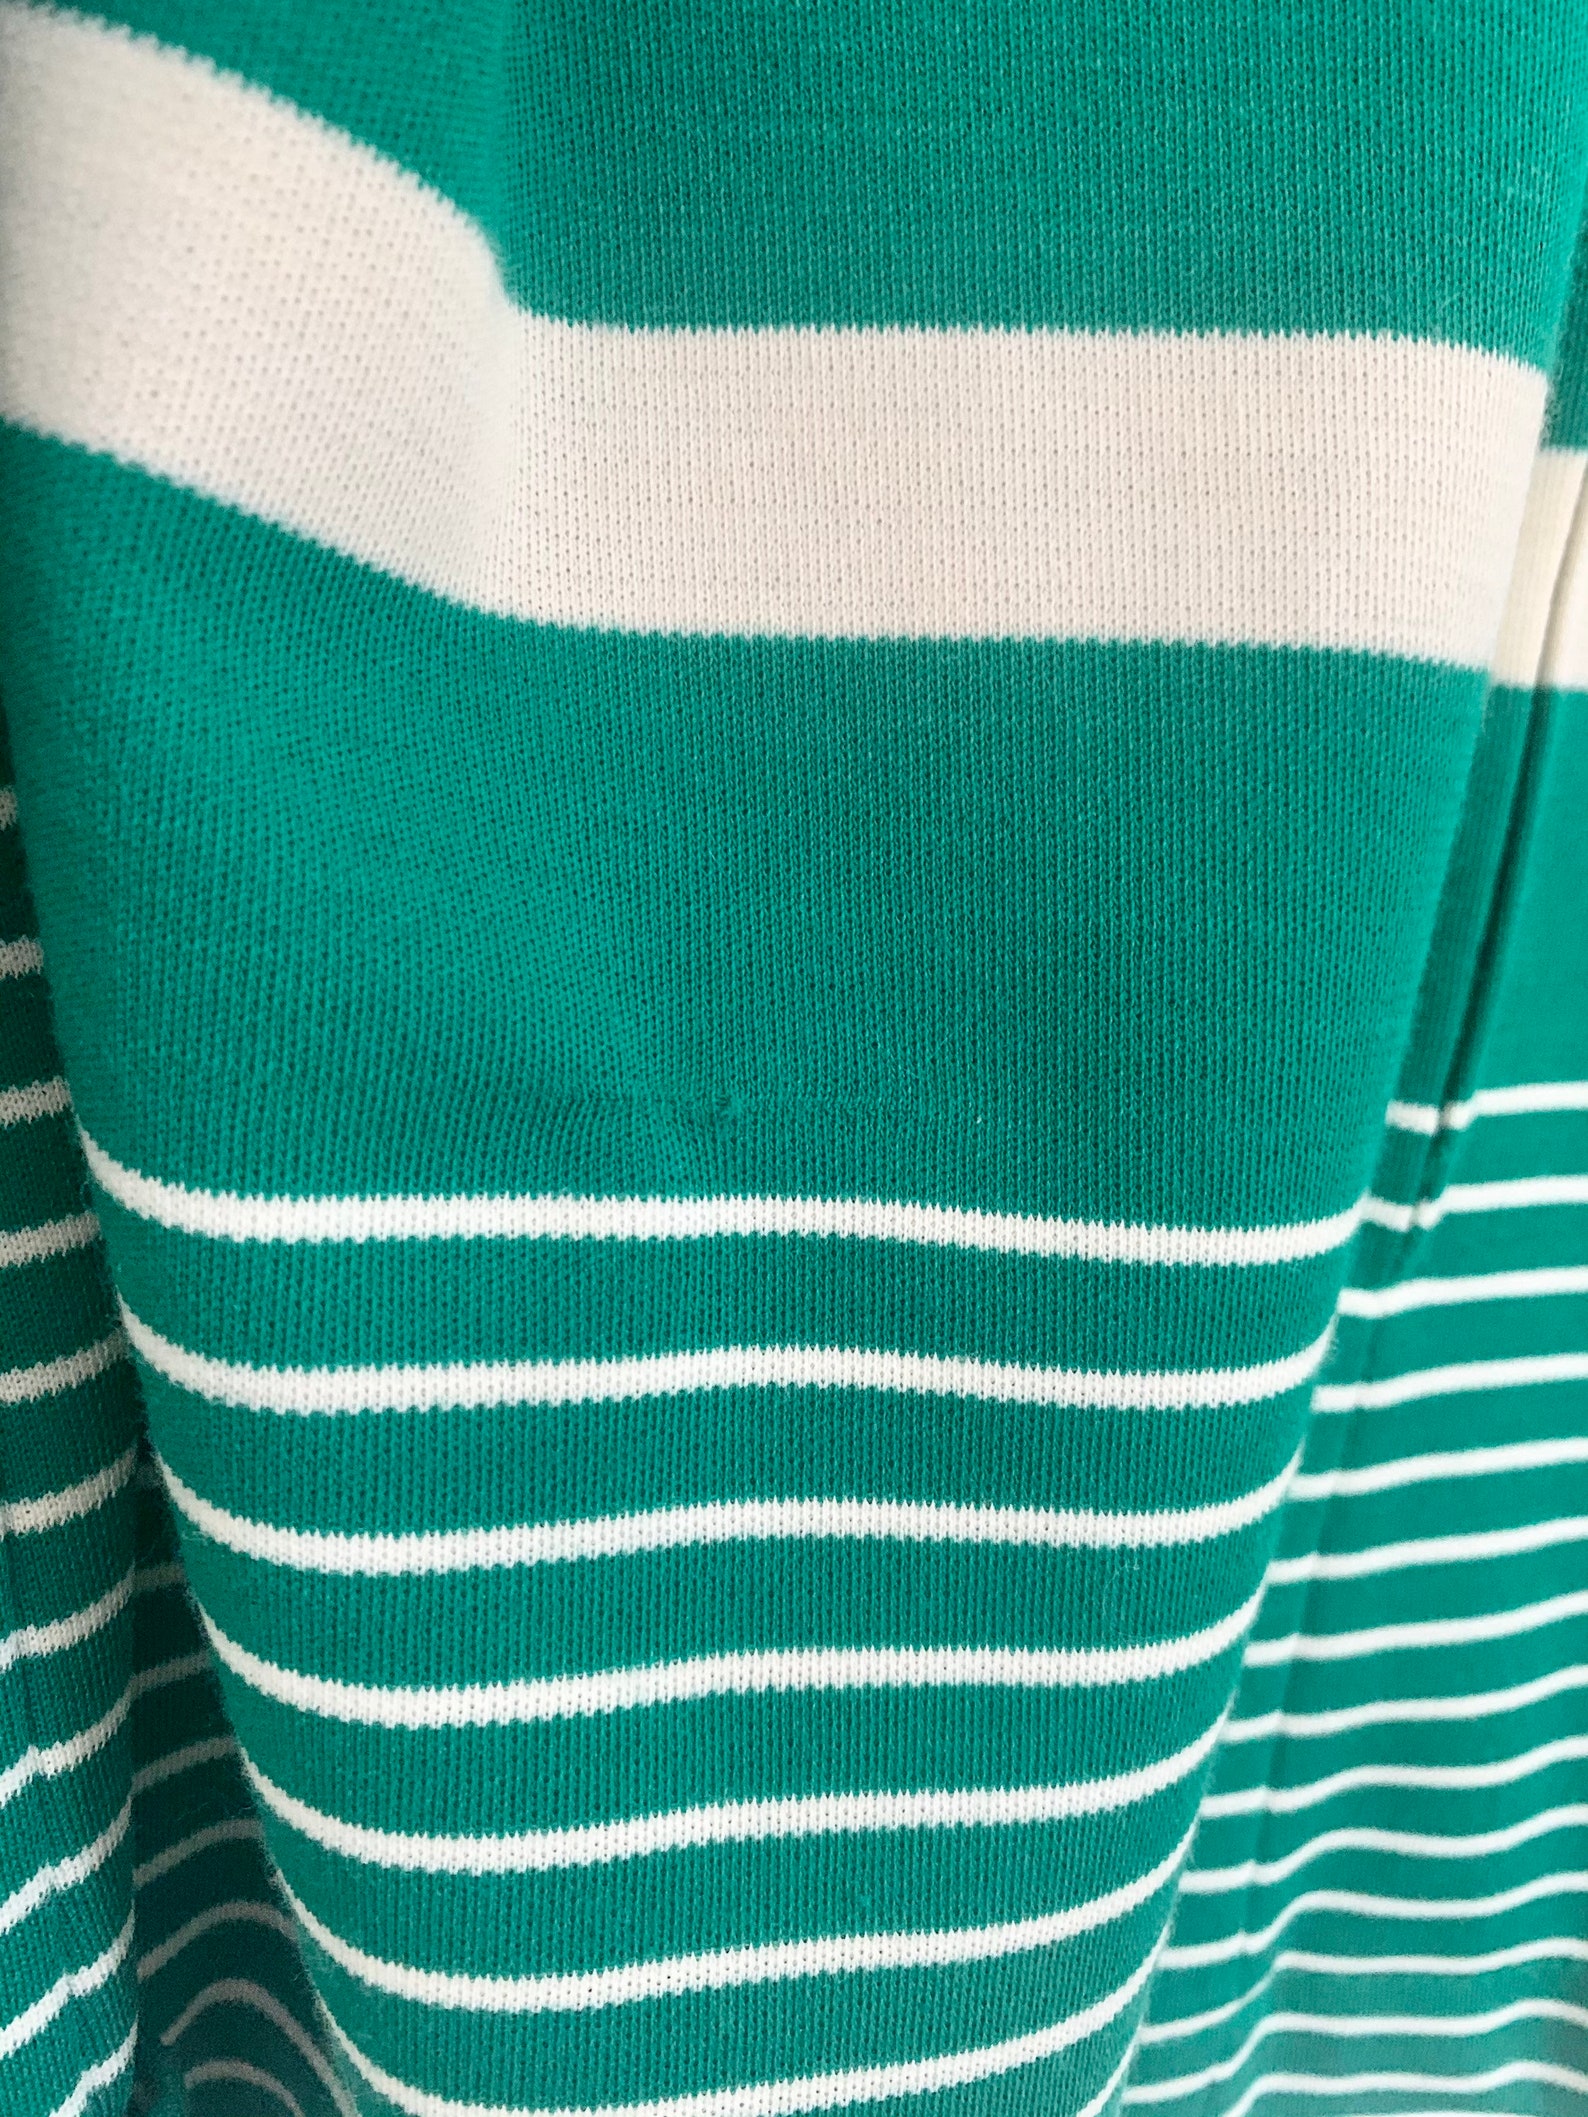 Vintage Butte Knit Striped Green Pullover Top Bell Sleeve | Etsy